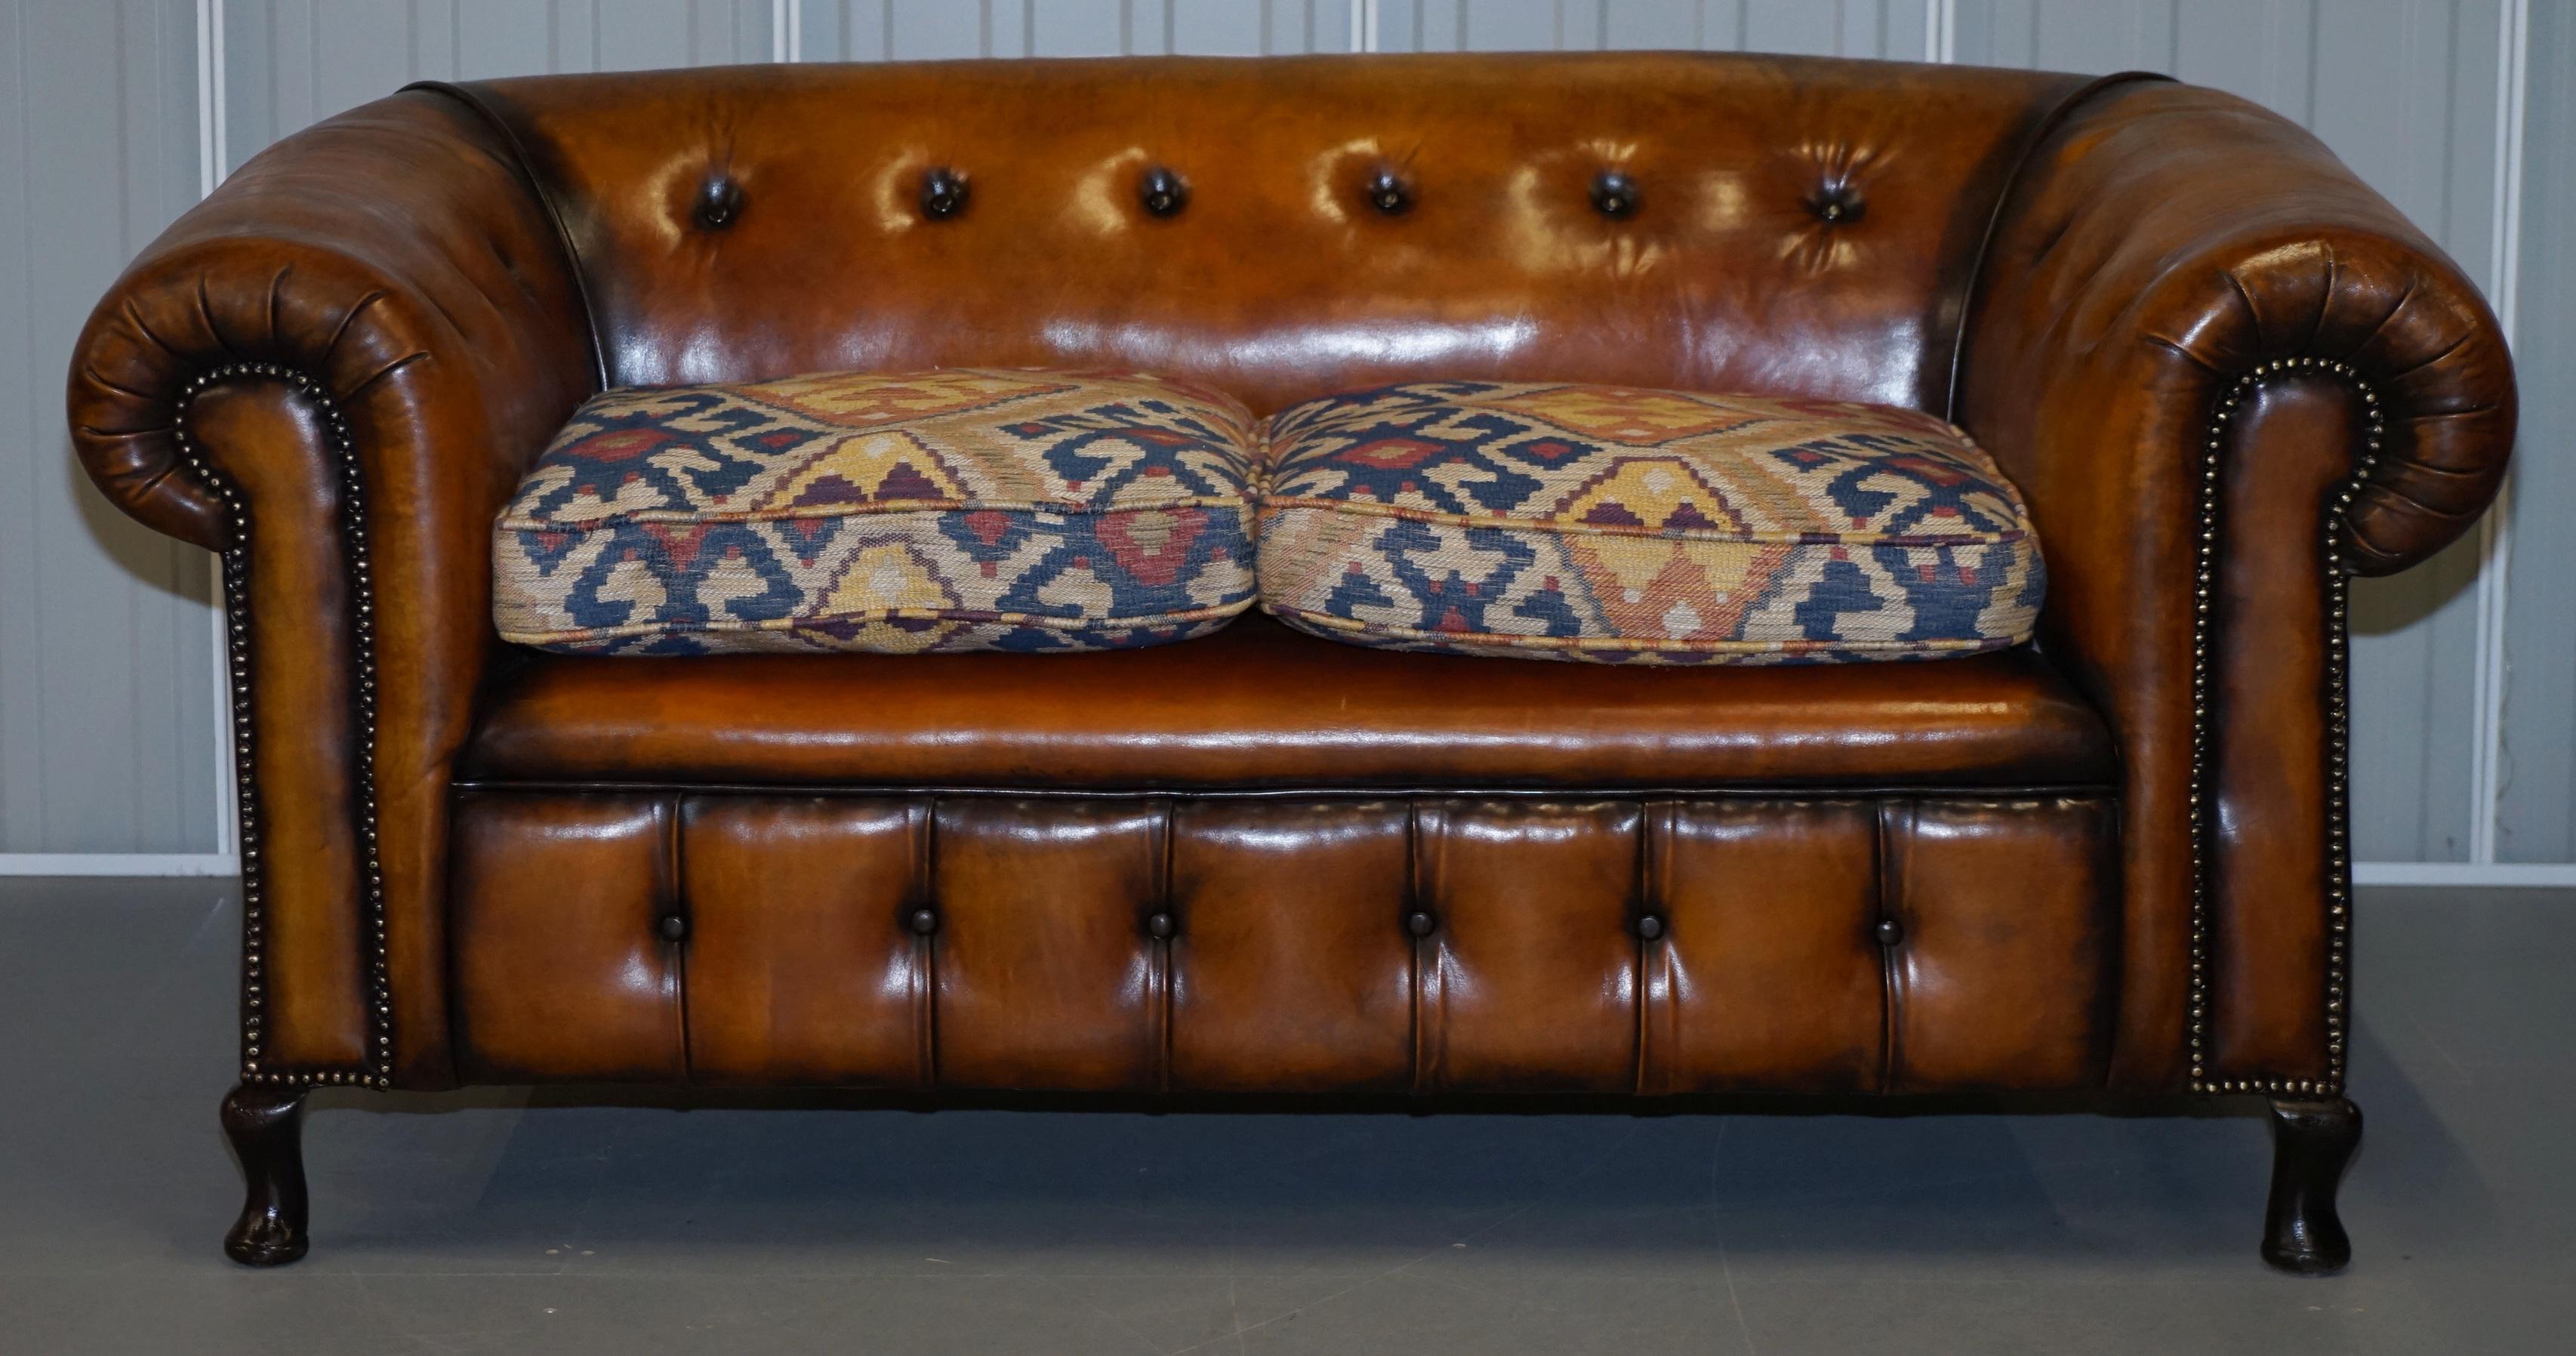 Wimbledon-Furniture

Wimbledon-Furniture is delighted to offer for sale one of two fully restored hand dyed whisky brown leather Chesterfield sofas with kilim upholstered cushions

Please note the delivery fee listed is just a guide, it covers